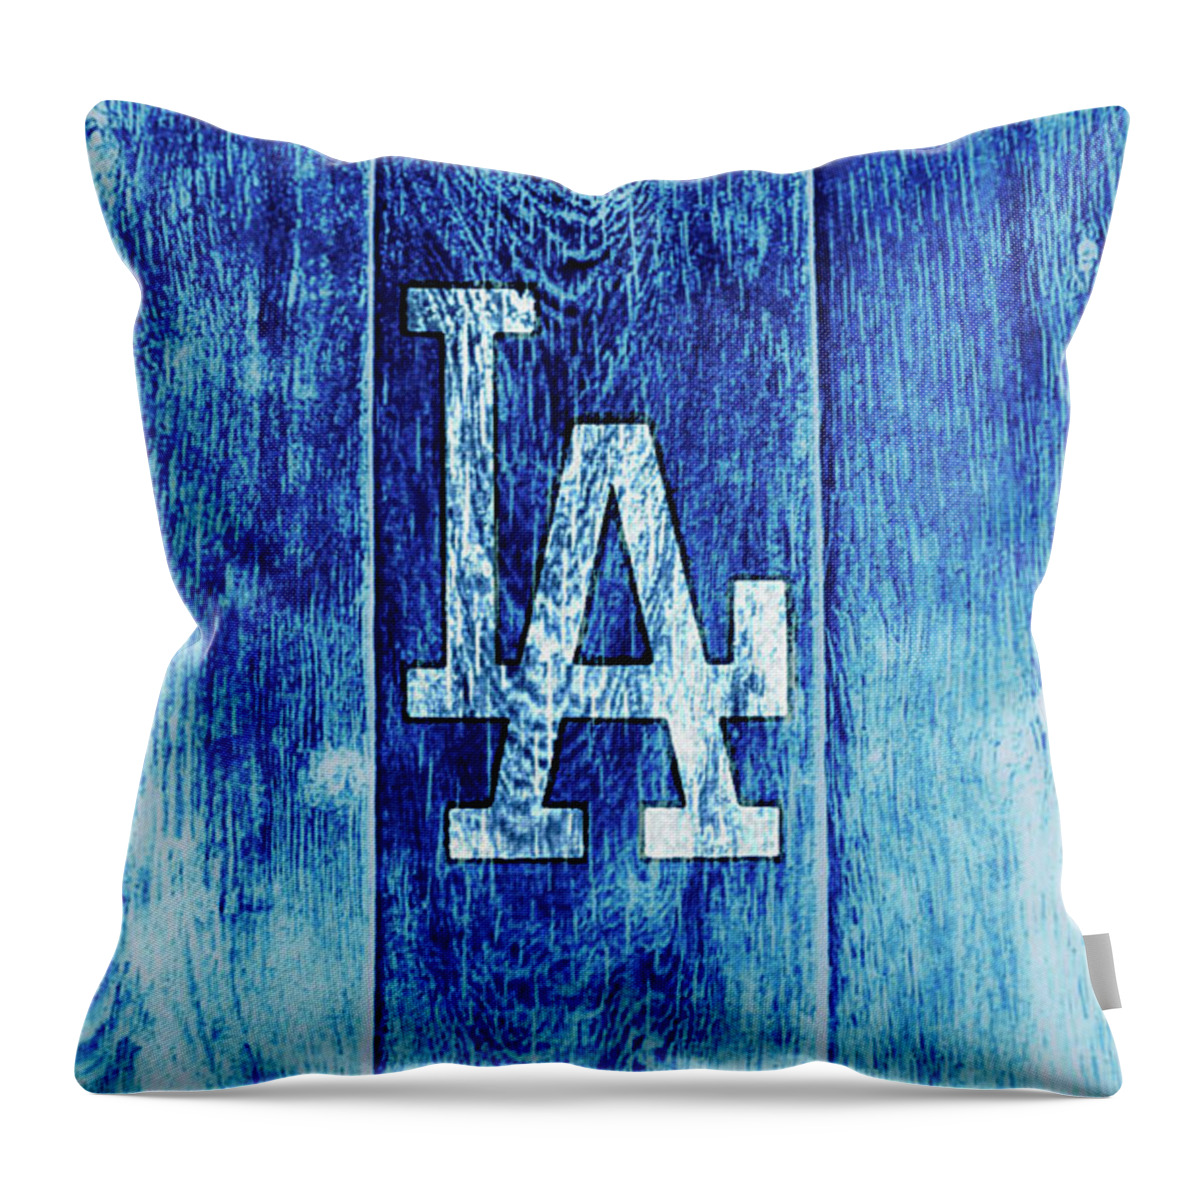 Dodgers Throw Pillow featuring the photograph Dodger Wall by Billy Knight